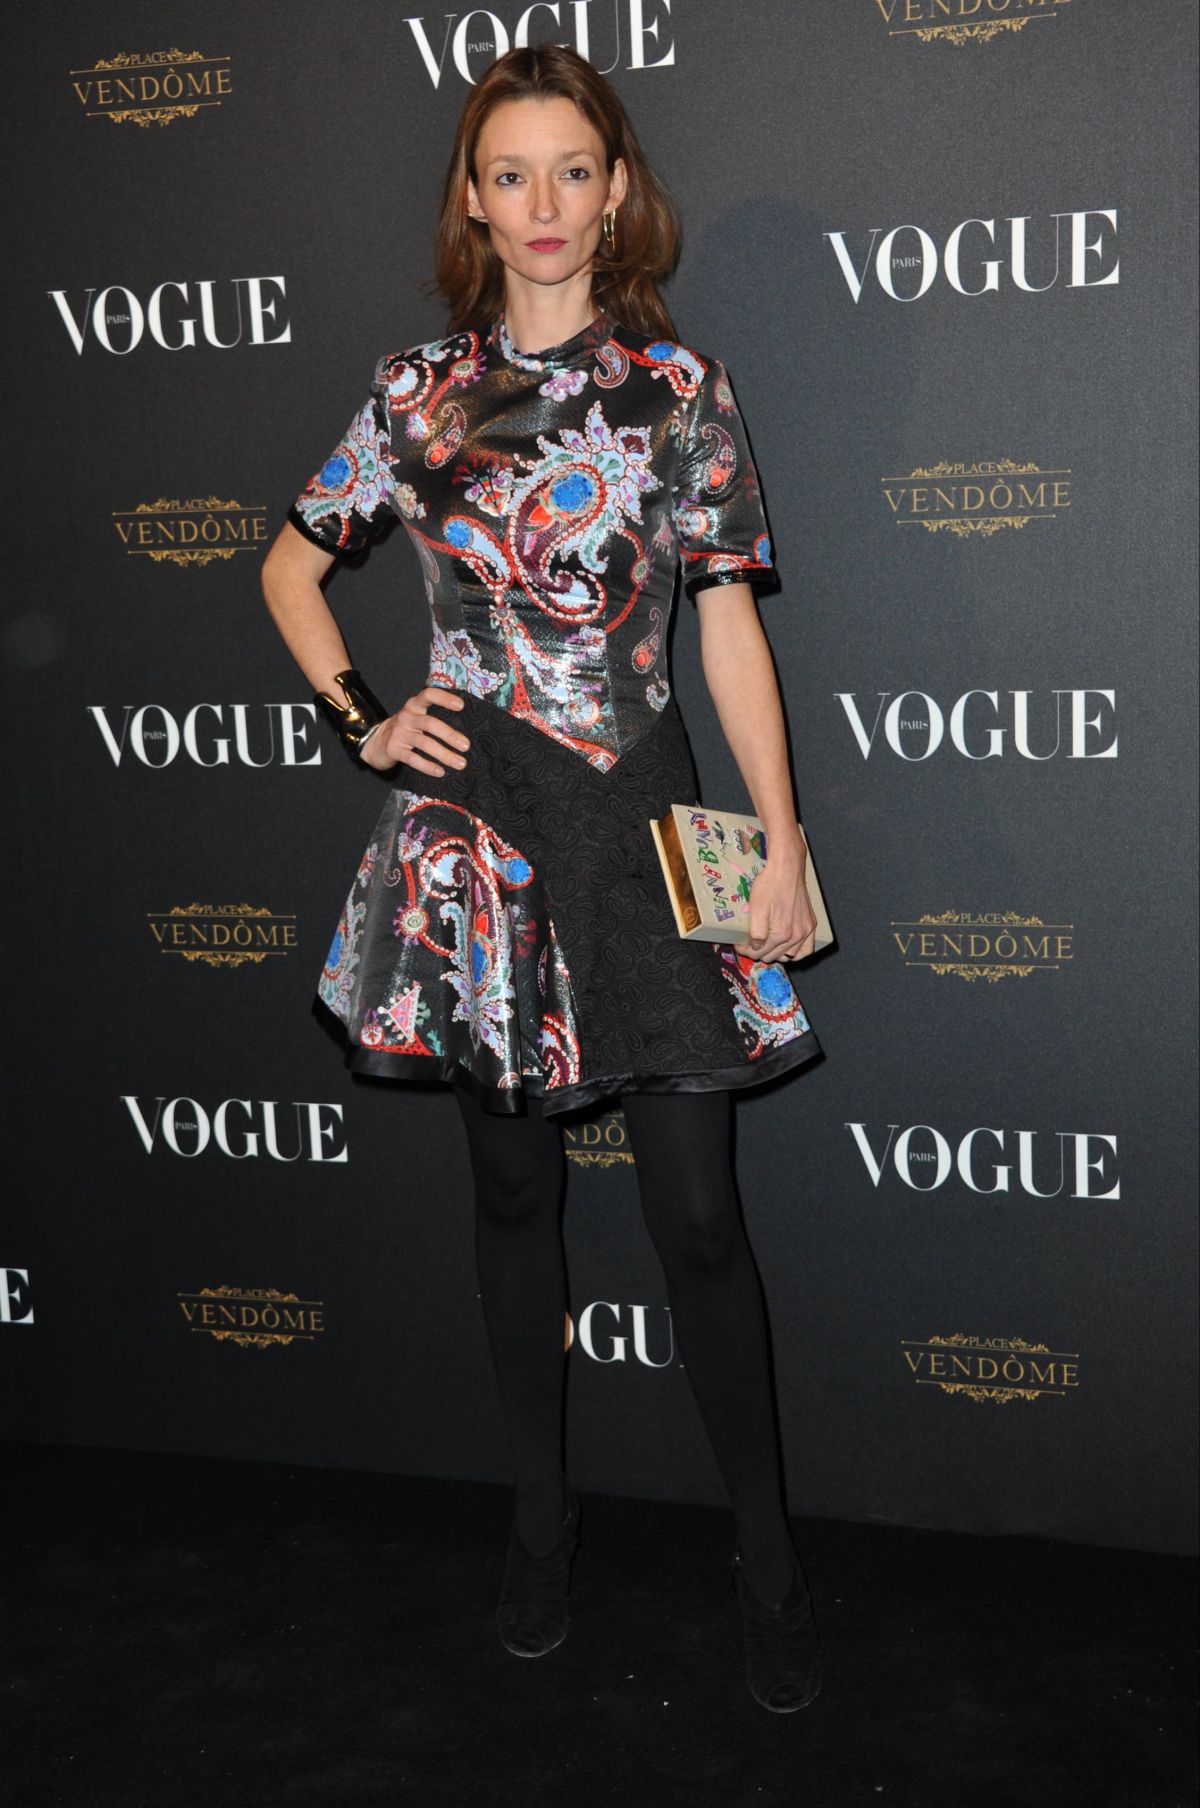 AUDREY MARNAY at Vogue 95th Anniversary Party in Paris 10/03/2015